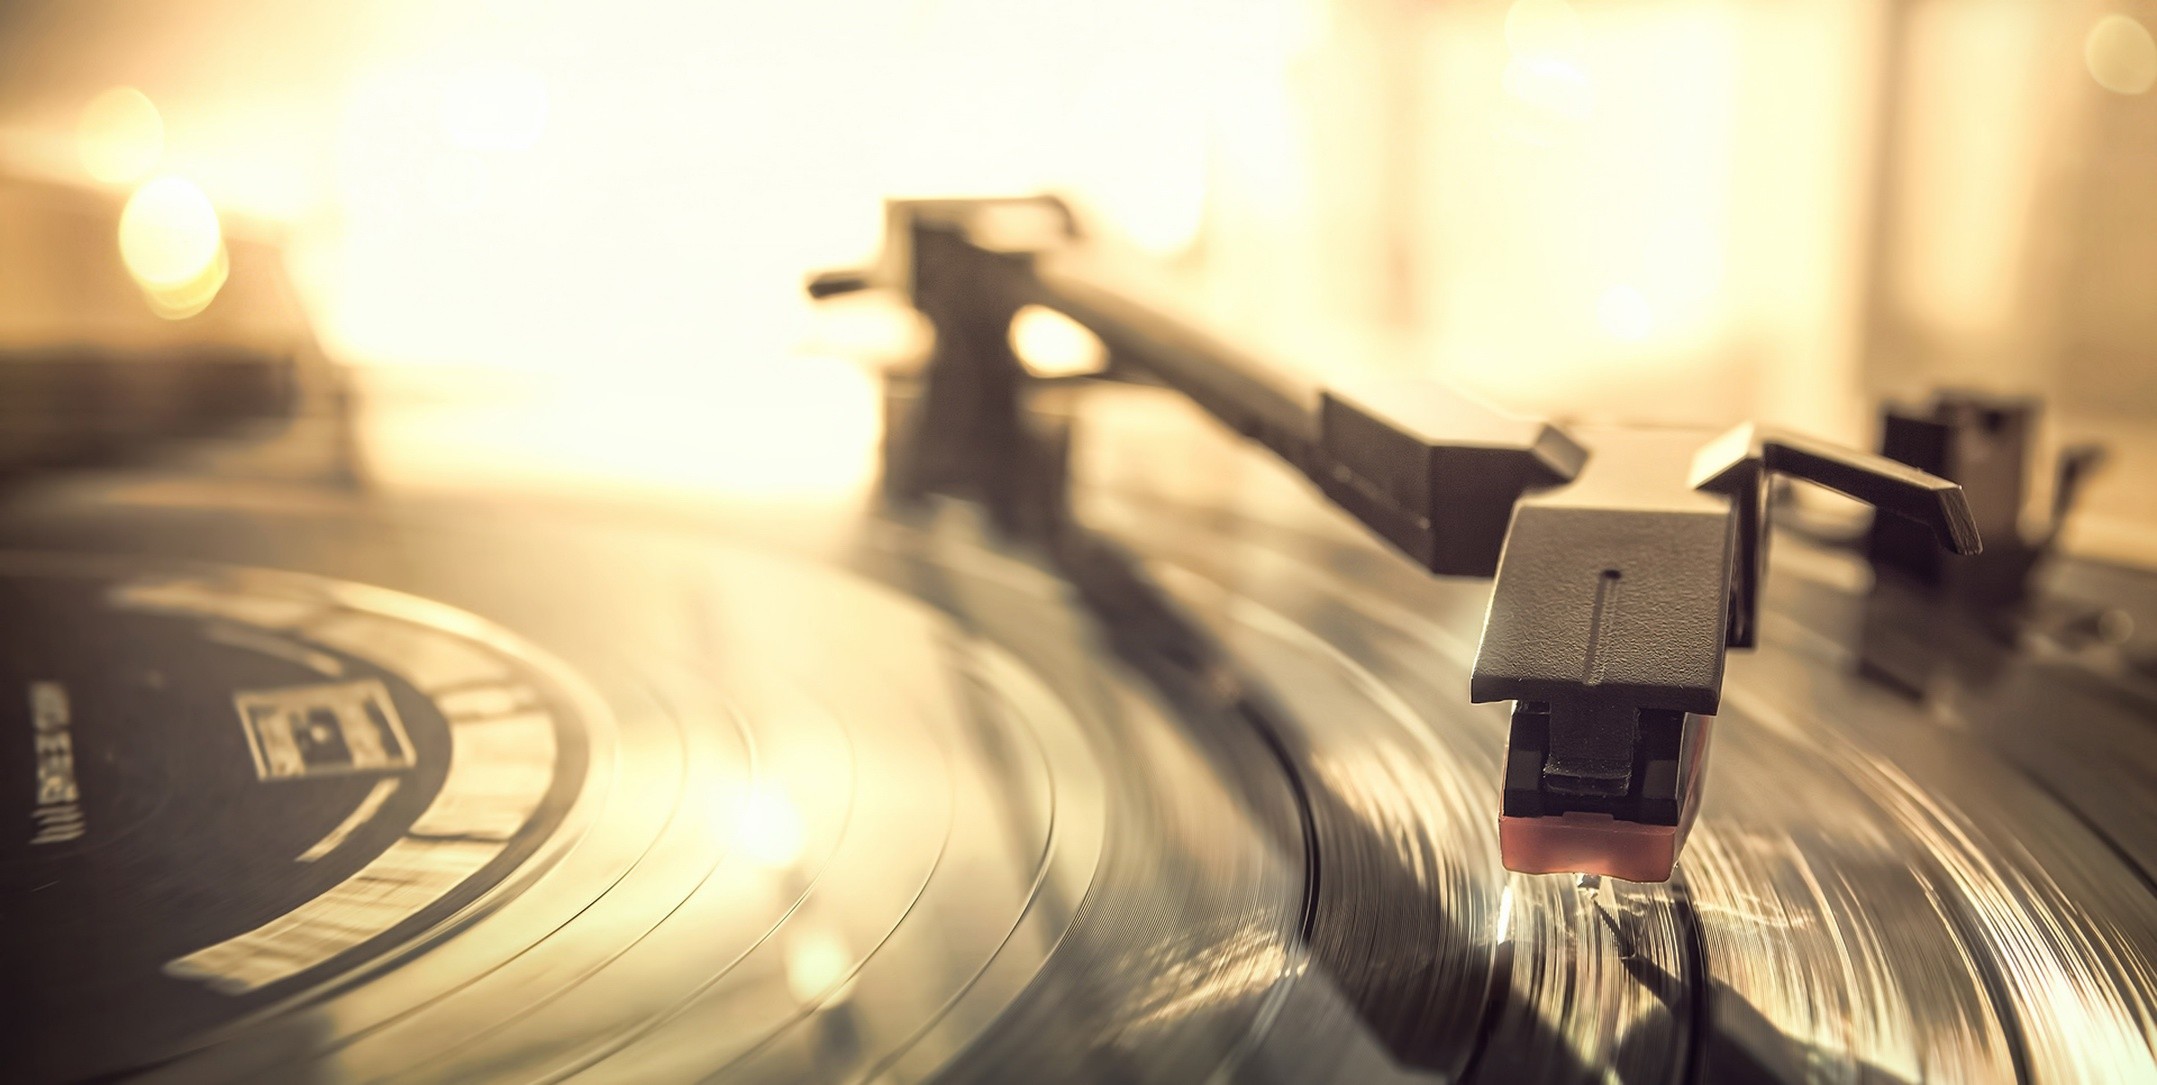 2157x1085 Wallpaper plate, record player, vinyl, theme music - download Wallpapers  and Desktop Backgrounds